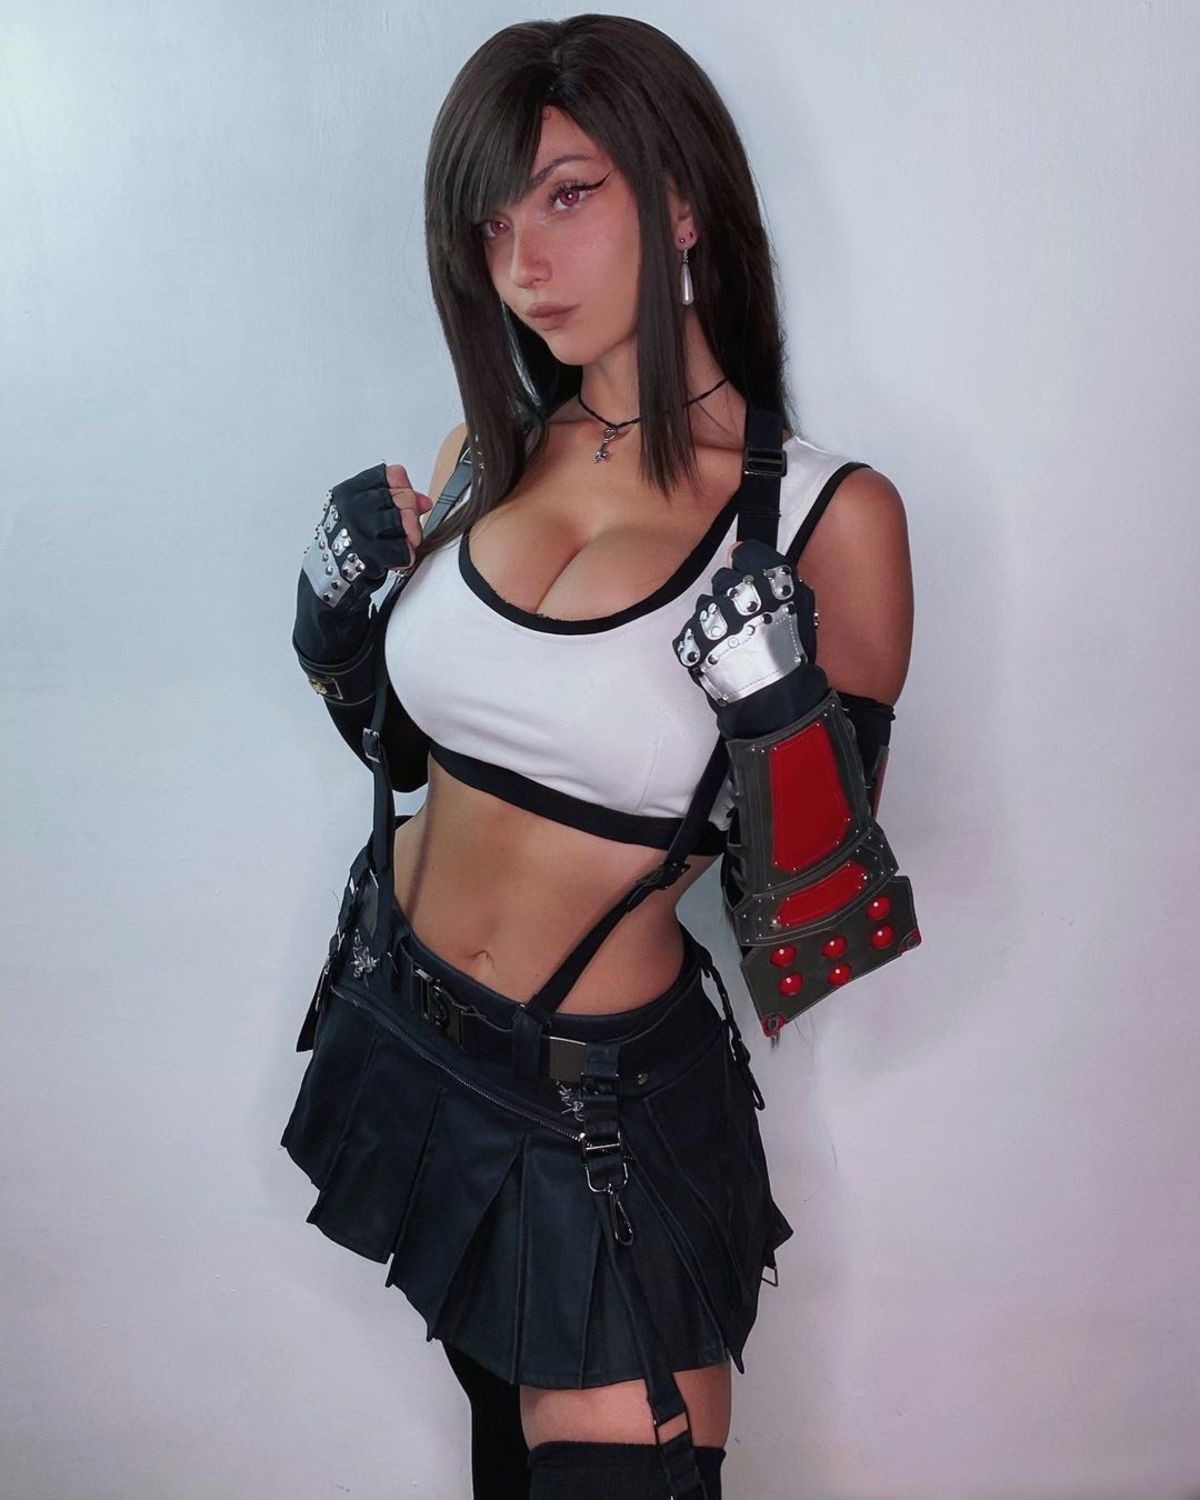 Tifa Lockhart by Soryu Geggy Cosplay. .. I'm just admiring how gorgeous she is and slowly slipping into madness that I will be alone forever